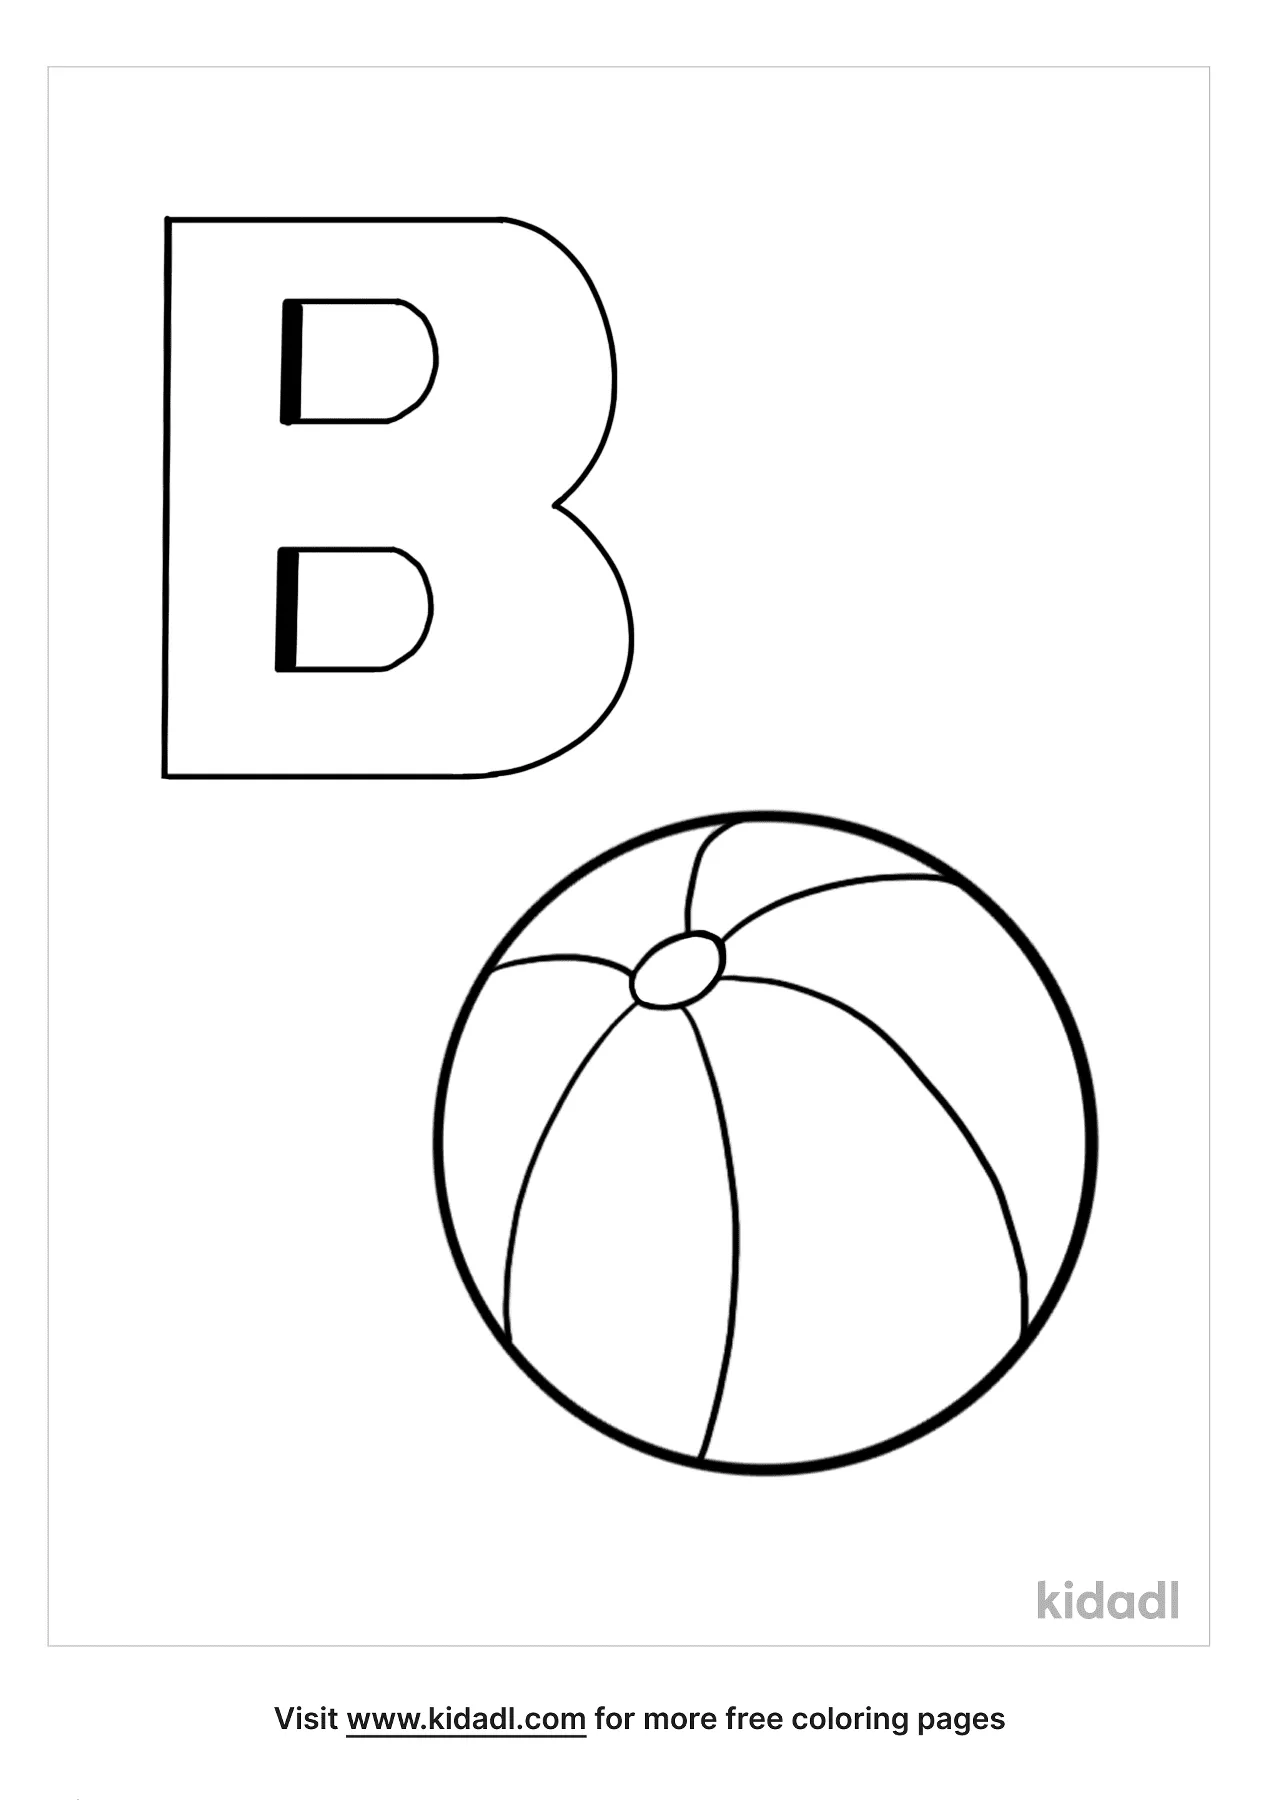 free-letter-b-coloring-page-coloring-page-printables-kidadl